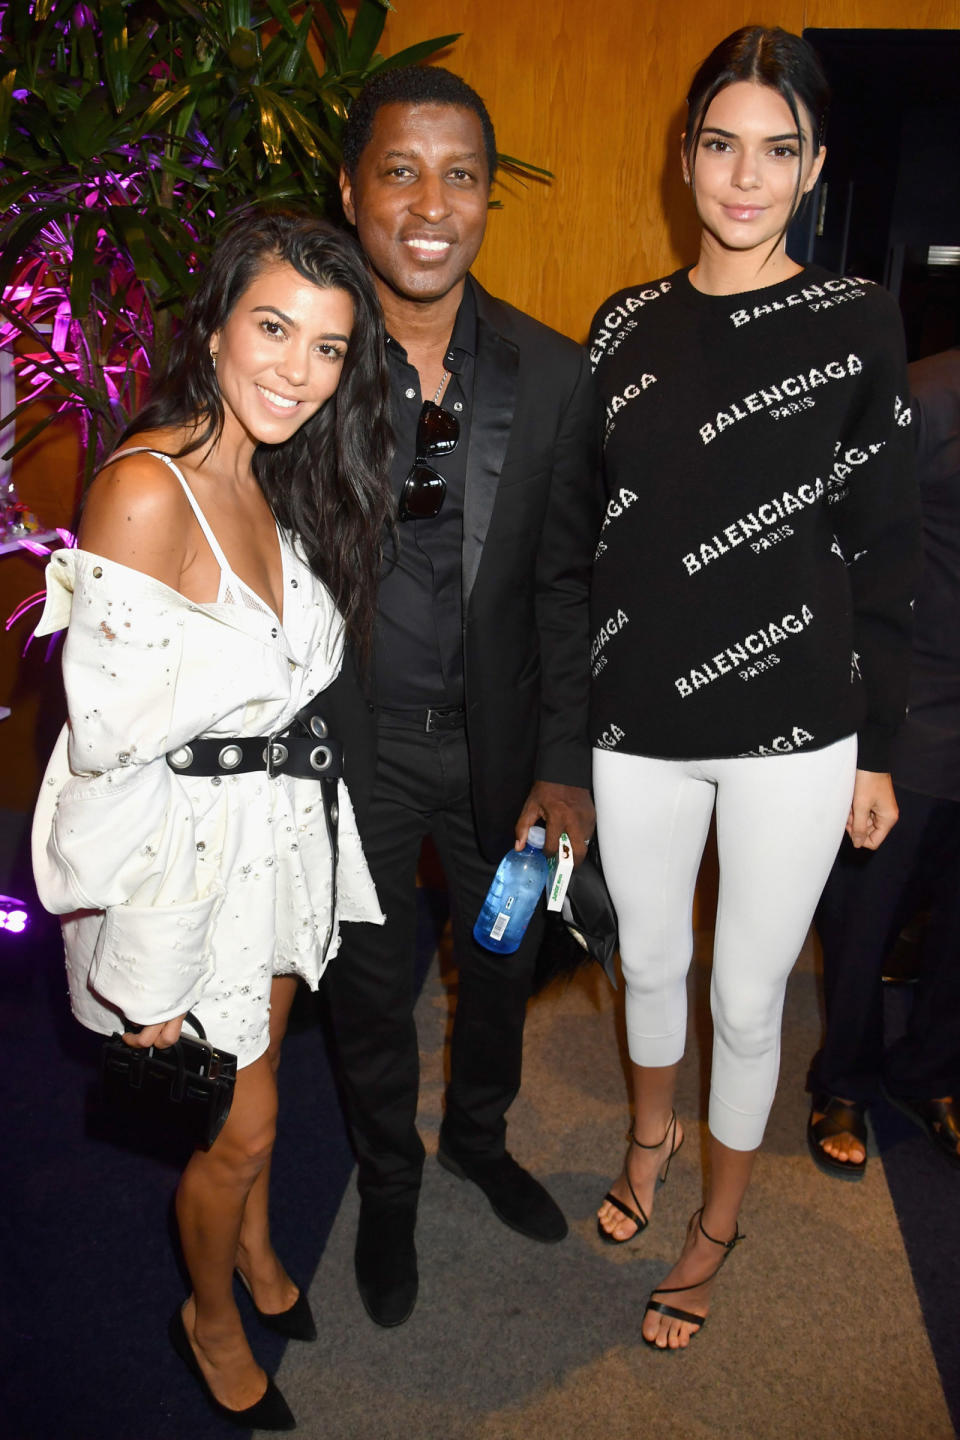 <p><strong>21 June</strong> Kendall Jenner made a statement in white leggings and a Balenciaga jumper as she posed with sister Kourtney Kardashian and Babyface at an Apple Music event in Los Angeles.</p>